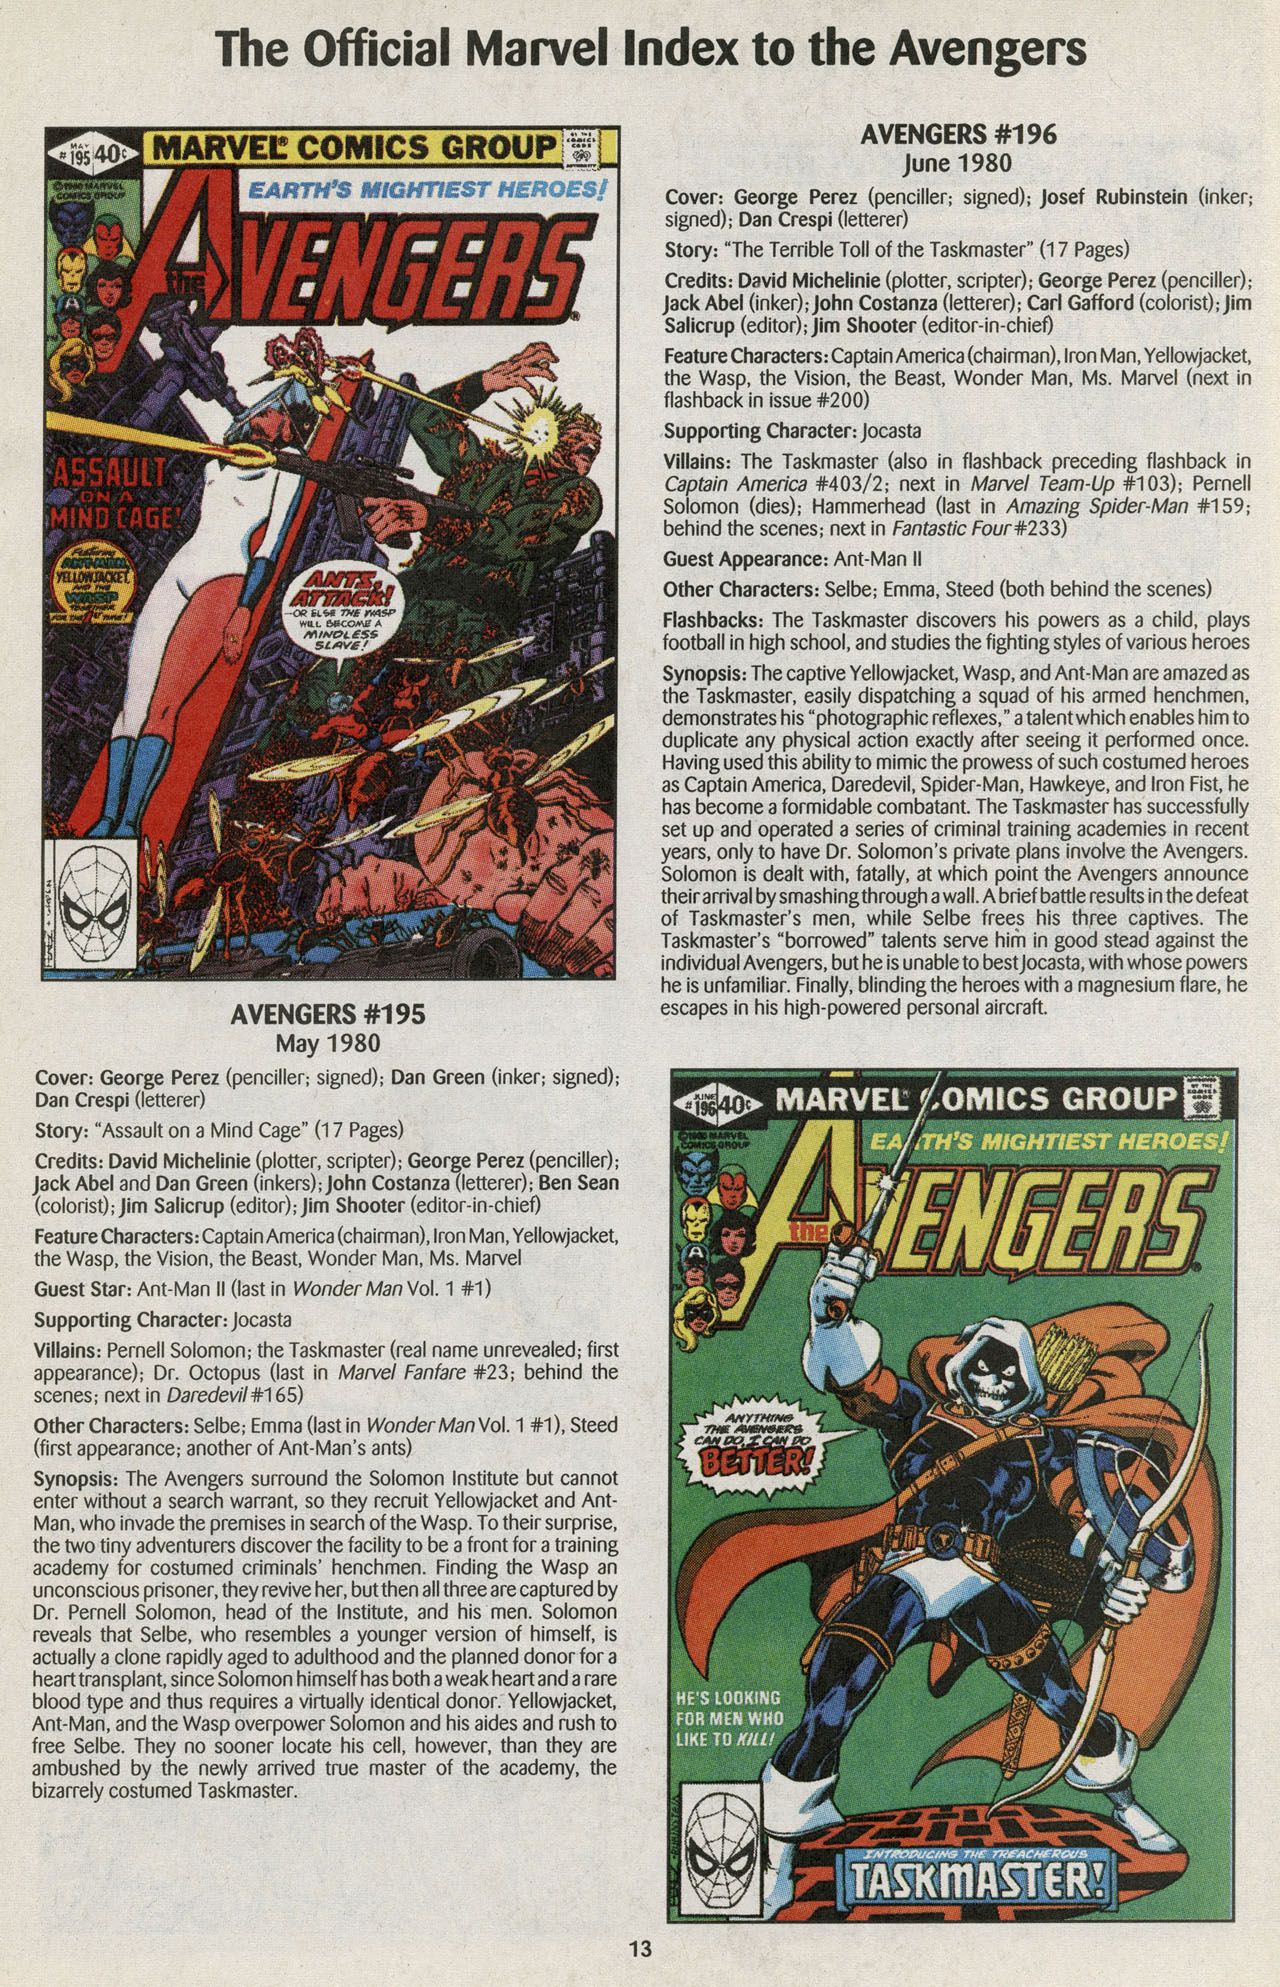 Read online The Official Marvel Index to the Avengers comic -  Issue #4 - 15